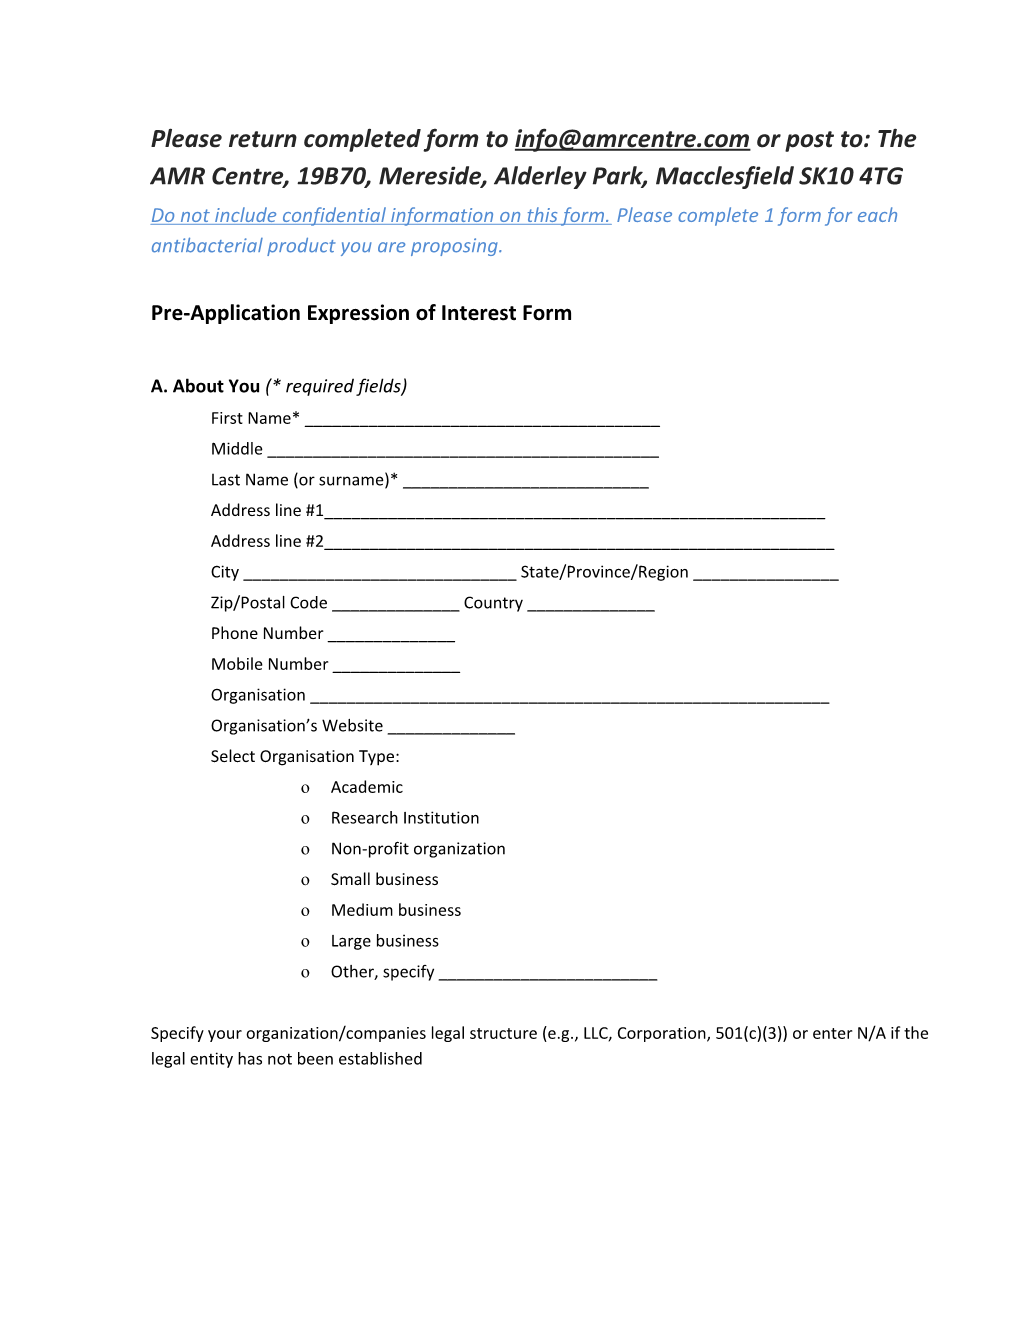 Pre-Application Expression of Interest Form